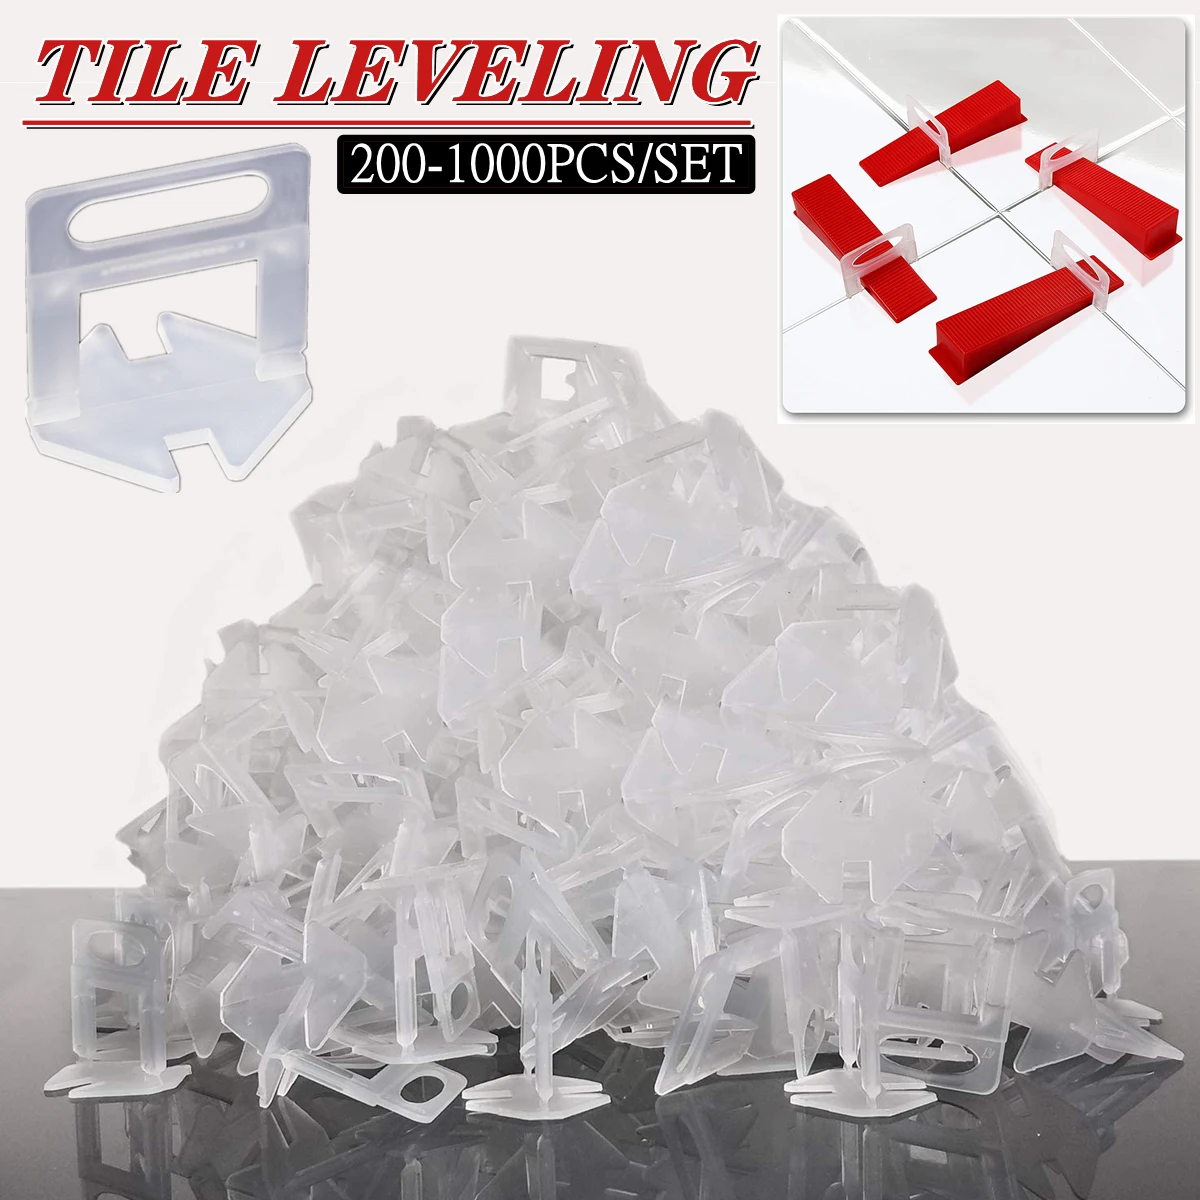 Tile Leveling System Clips 200-1000 Pieces Tile Spacers 1/1.5/2/2.5/3MM for Ceramic Tile Laying Leveling Construction Tools